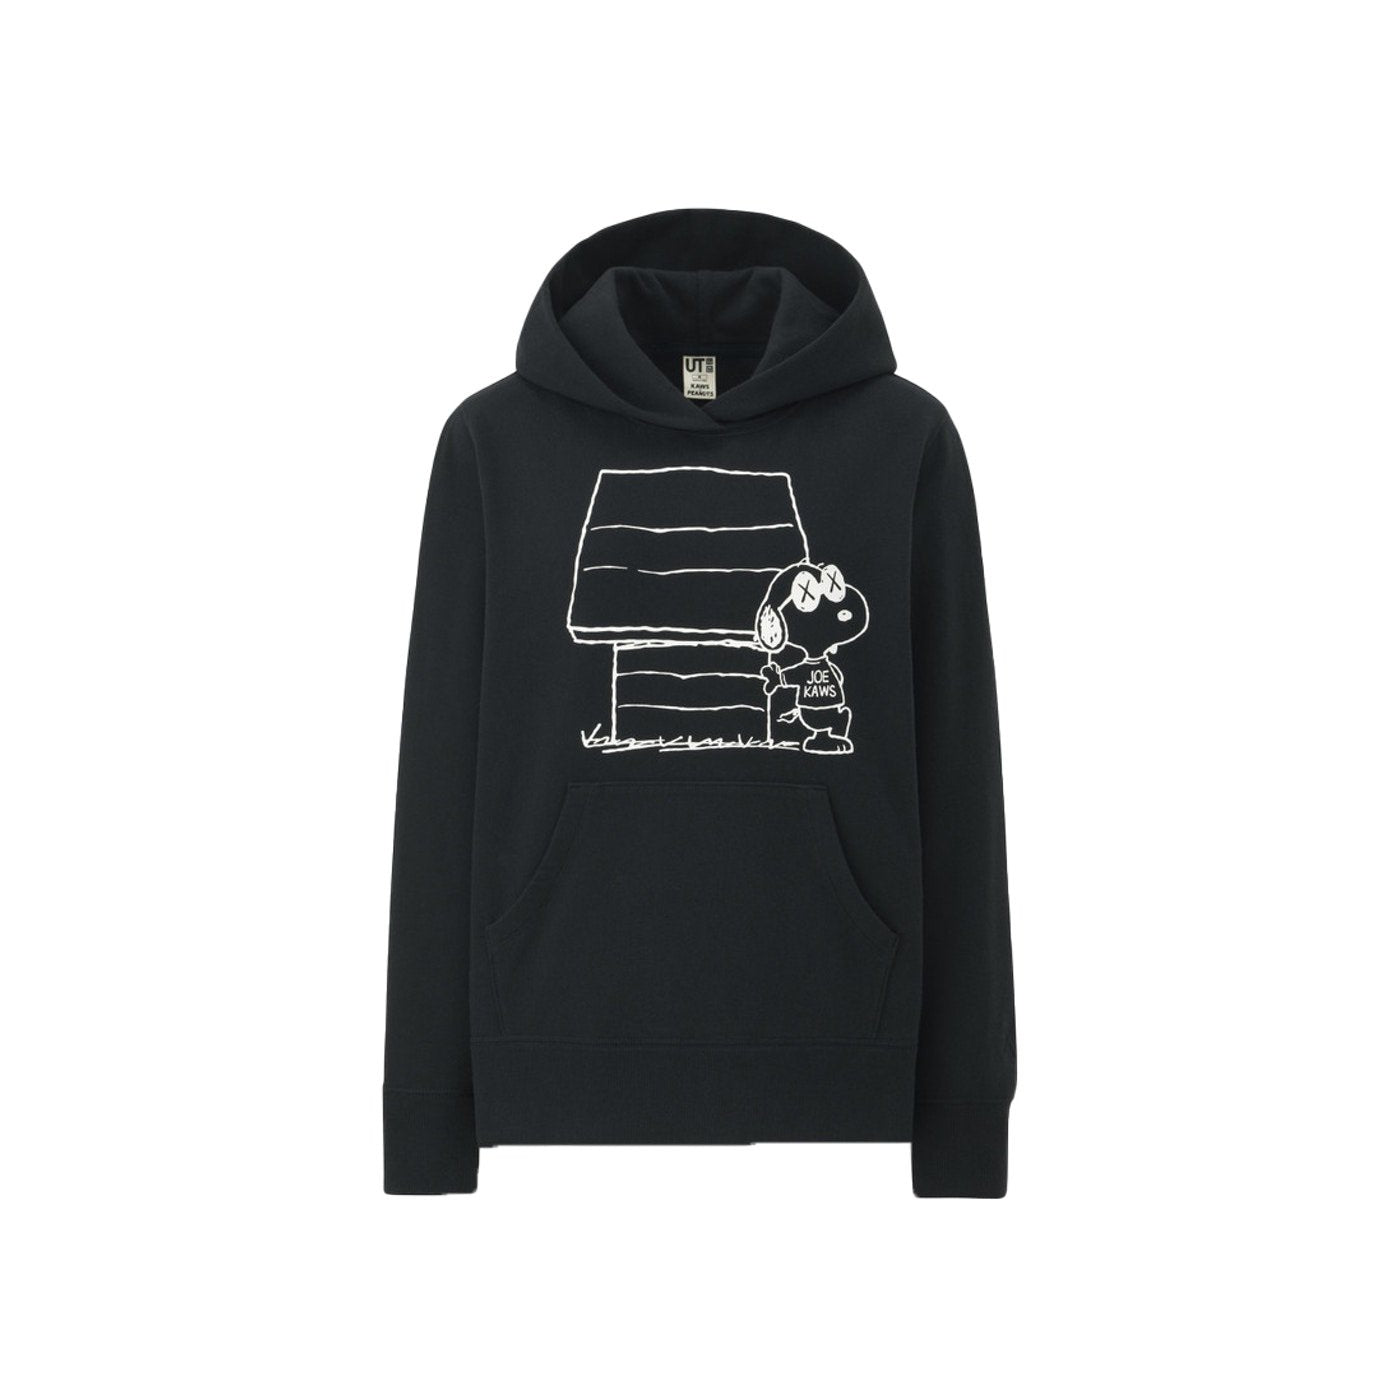 Uniqlo x Kaws Snoopy Black Pullover Hoodie - Centrall Online